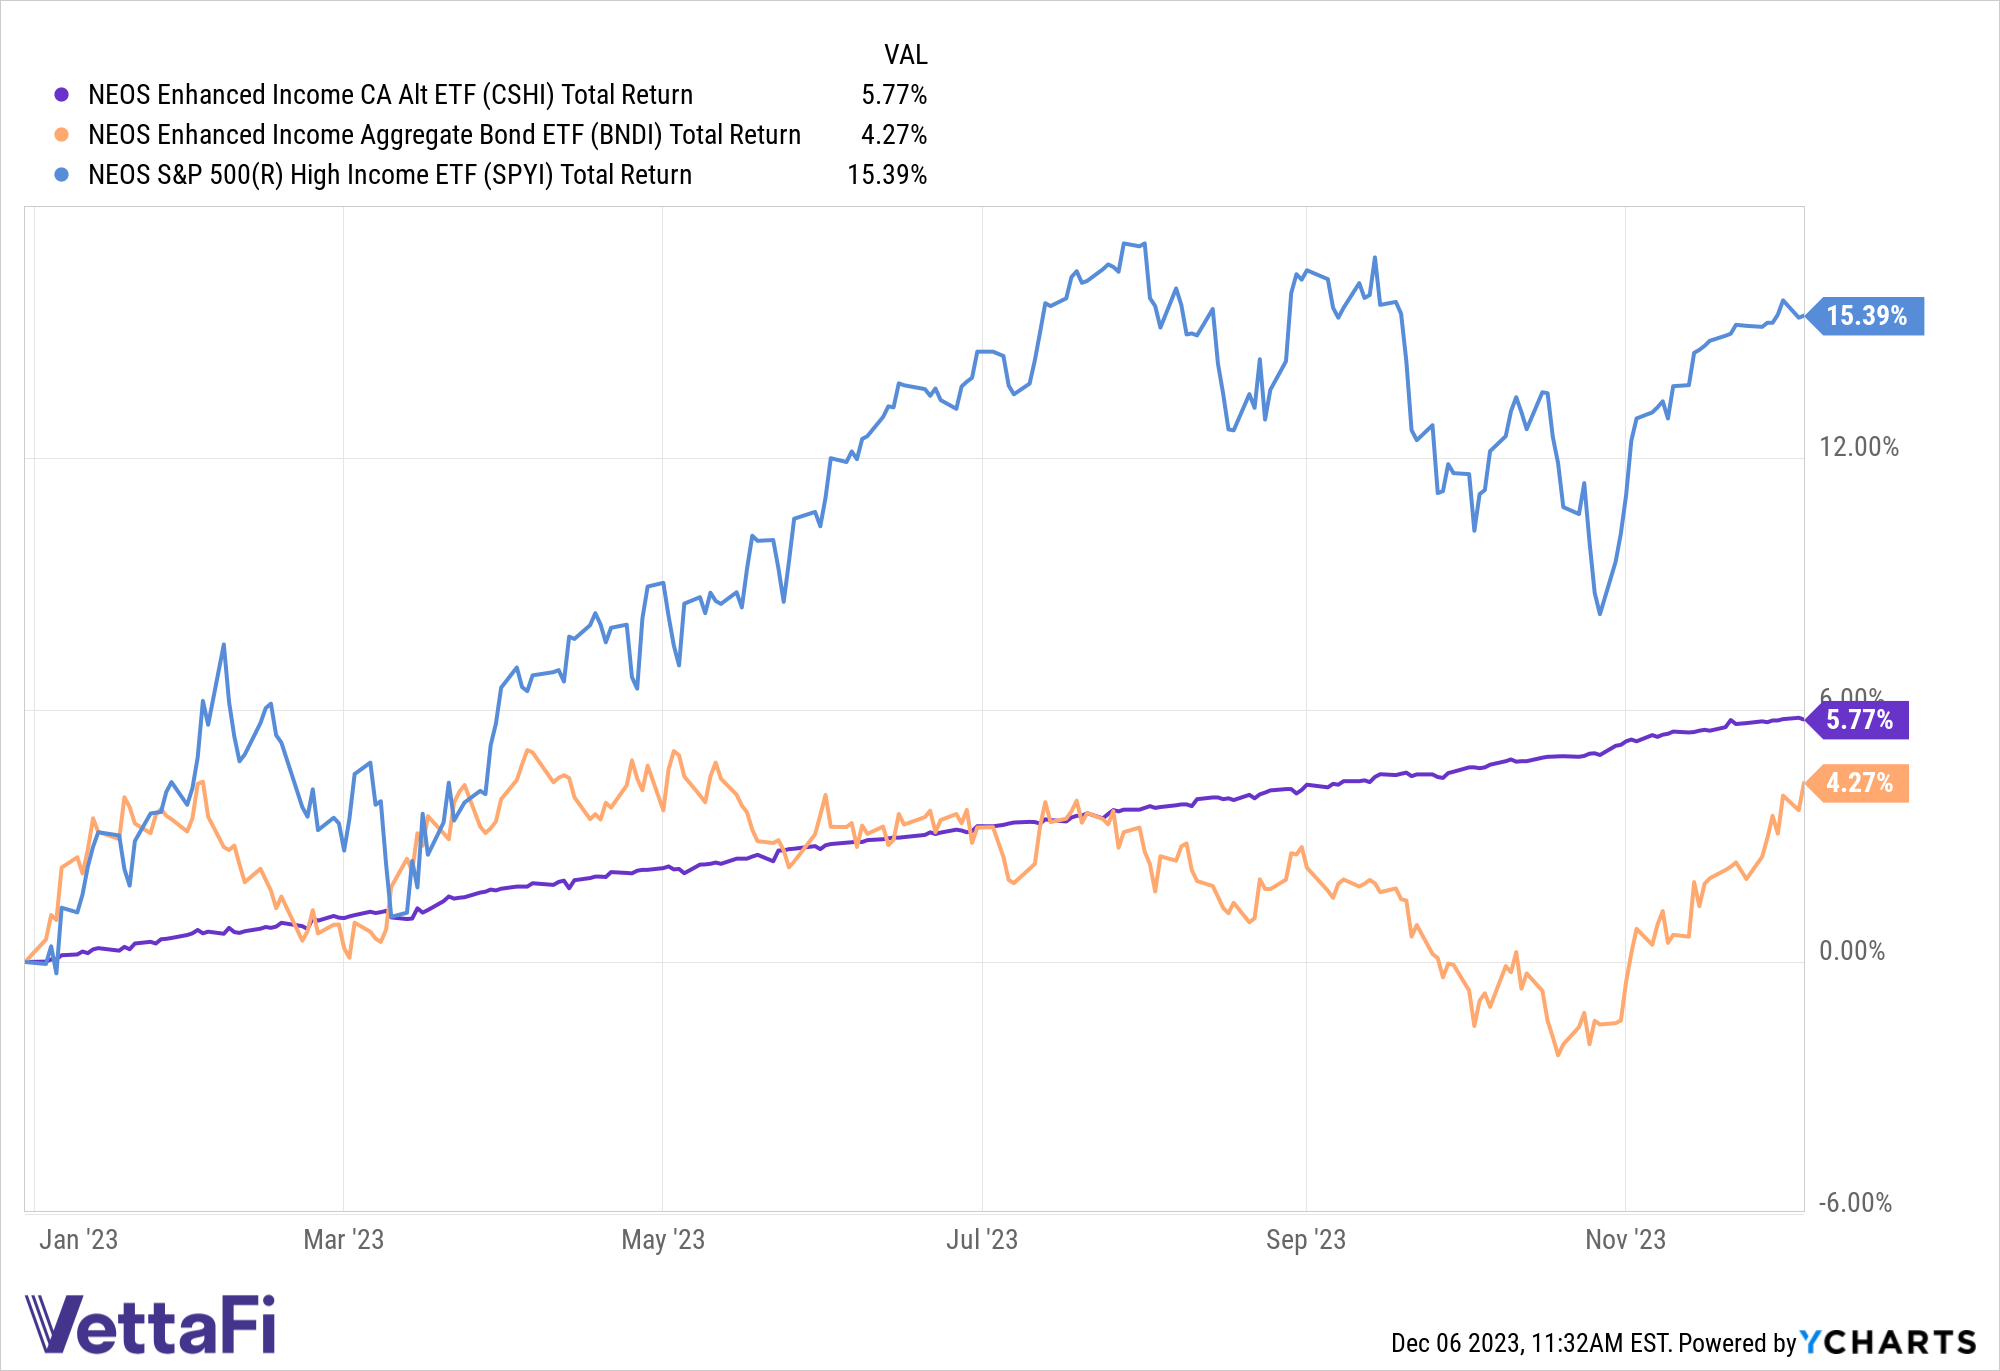 Total returns for SPYI, CSHI, and BNDI YTD as of 12/5/23.